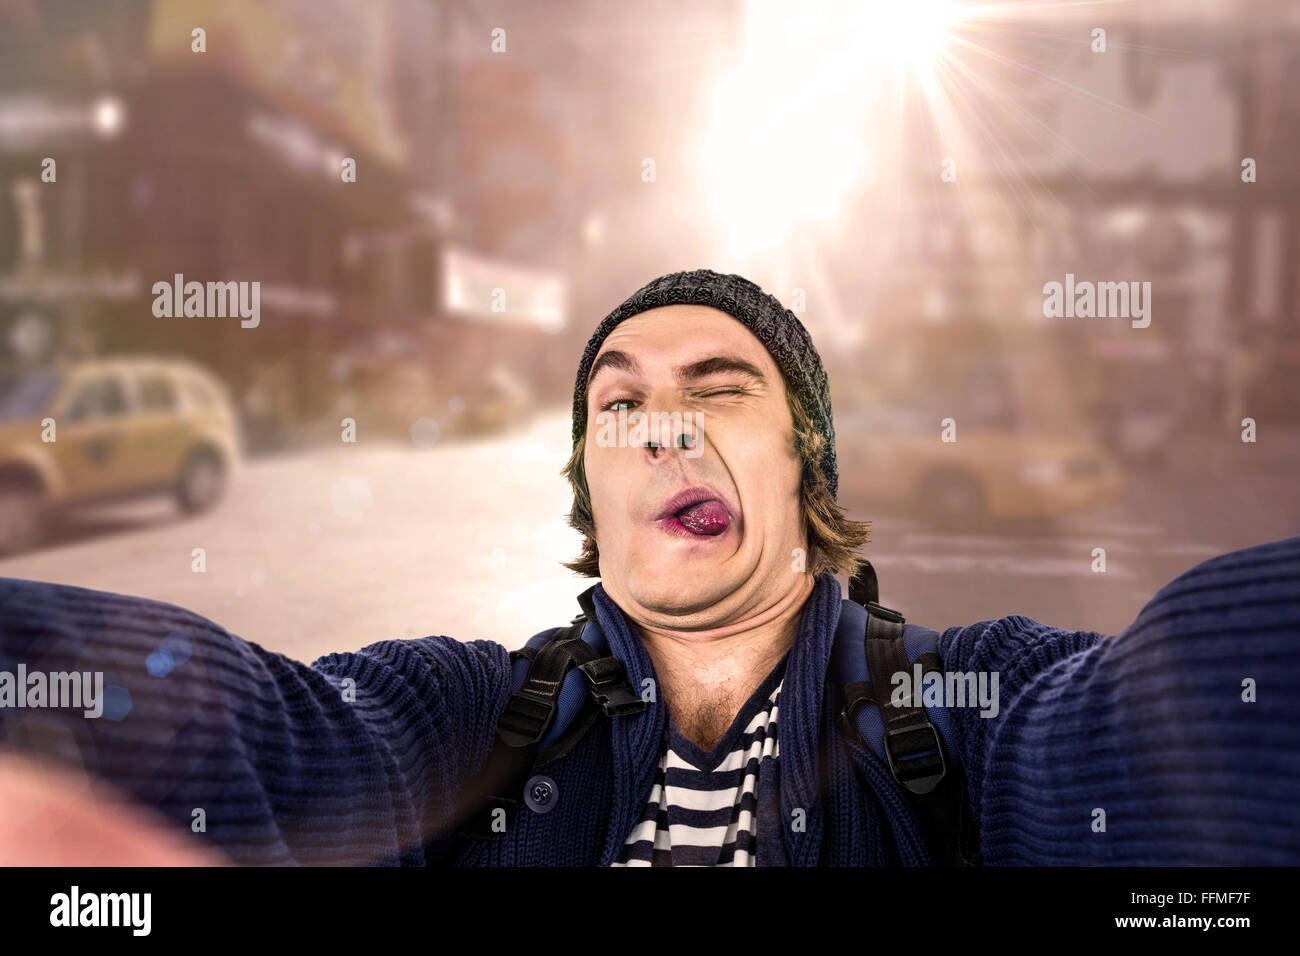 Composite image of hipster holding camera and grimacing Stock Photo